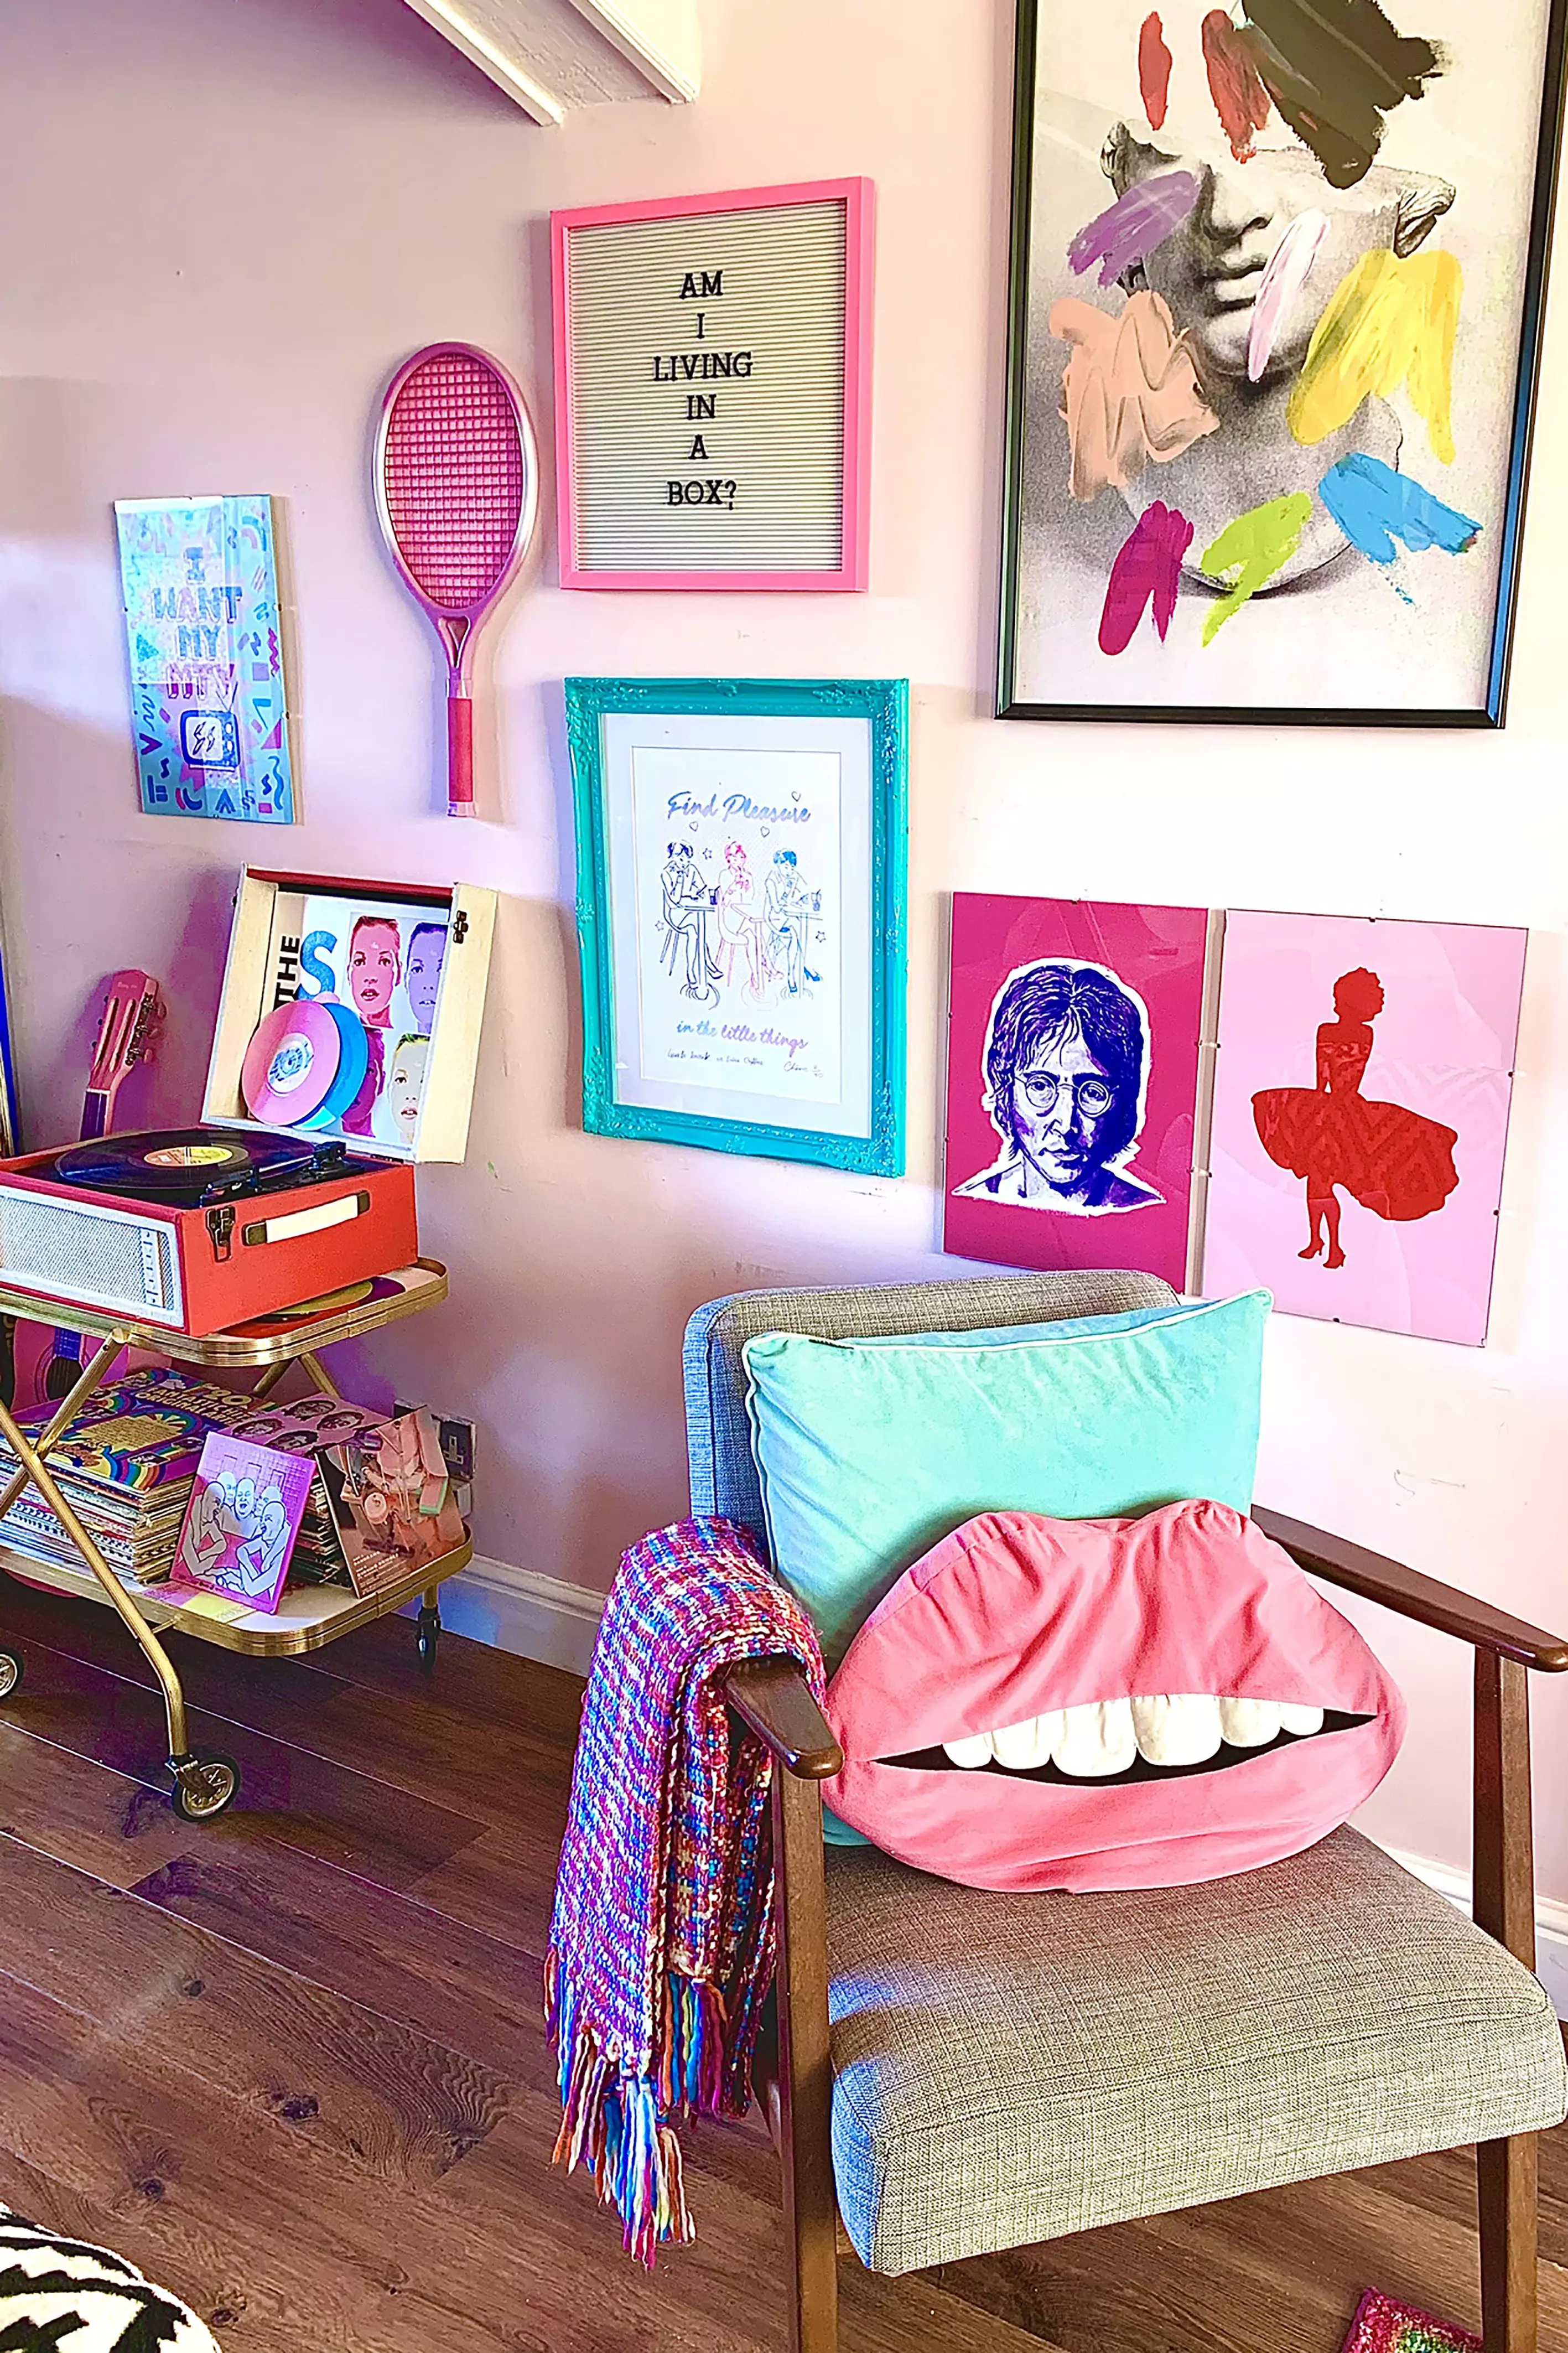 Rachael's home is jam-packed with bright interiors (